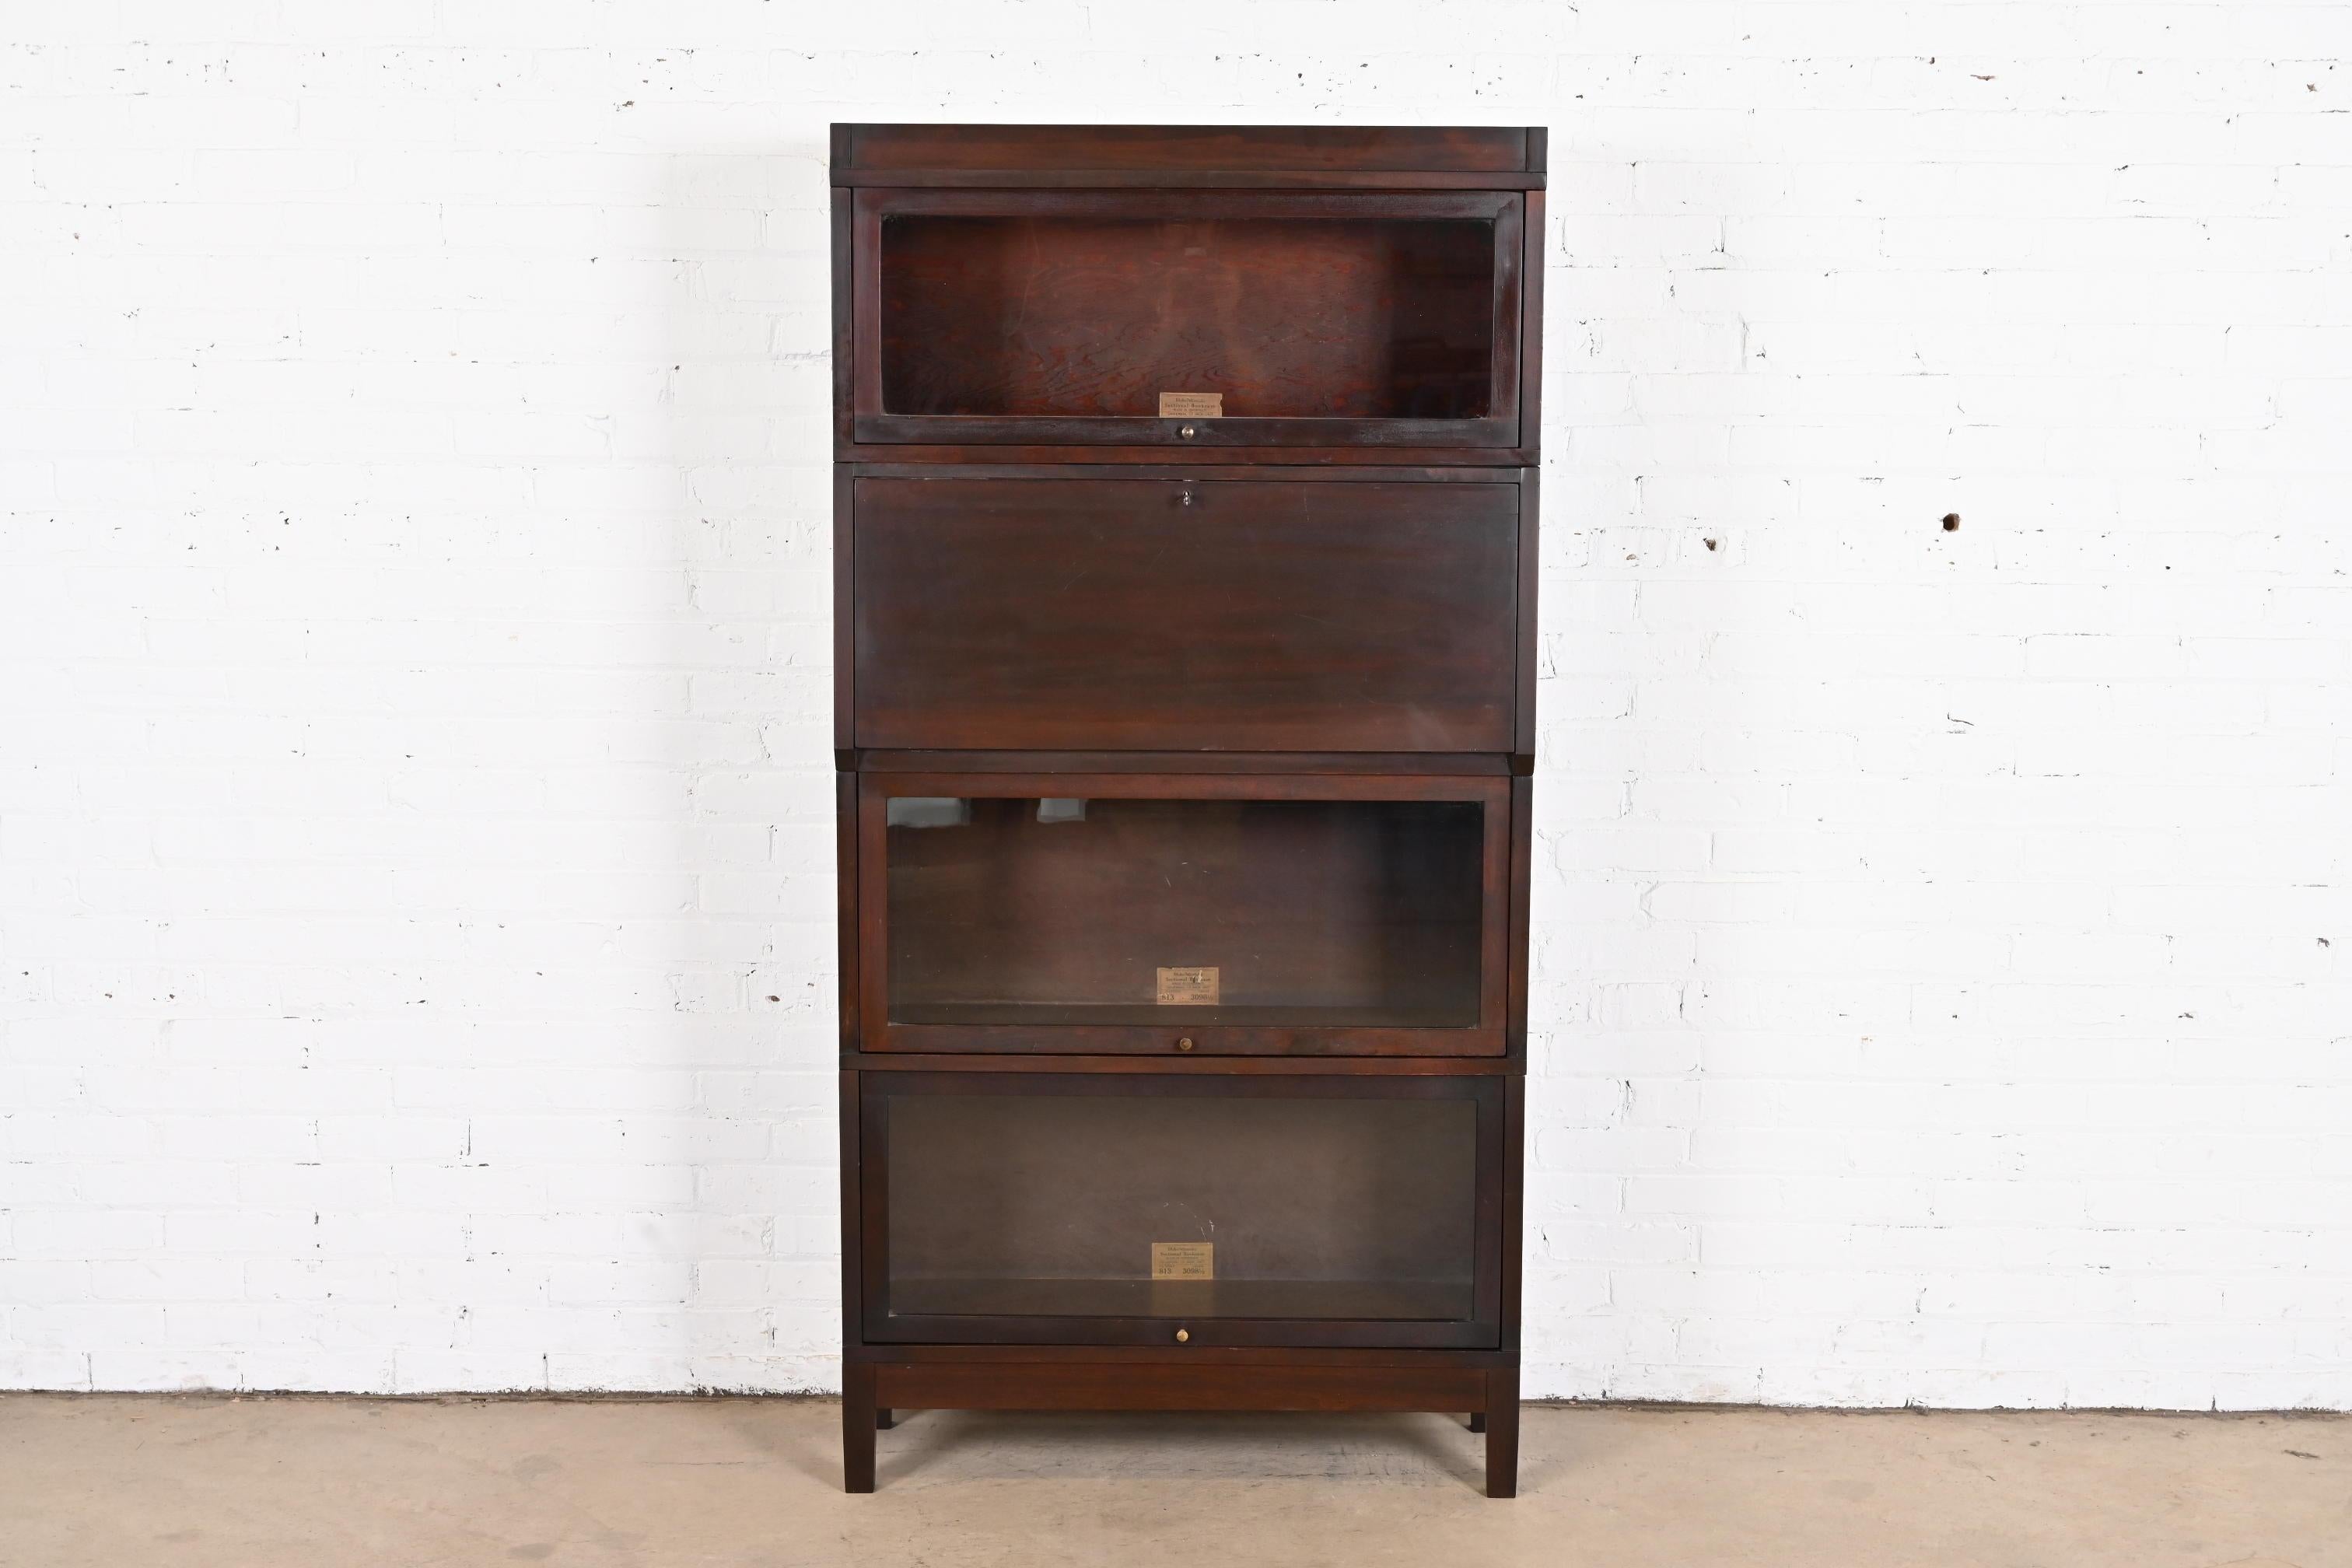 20th Century Antique Arts & Crafts Mahogany Barrister Bookcase with Drop Front Secretary Desk